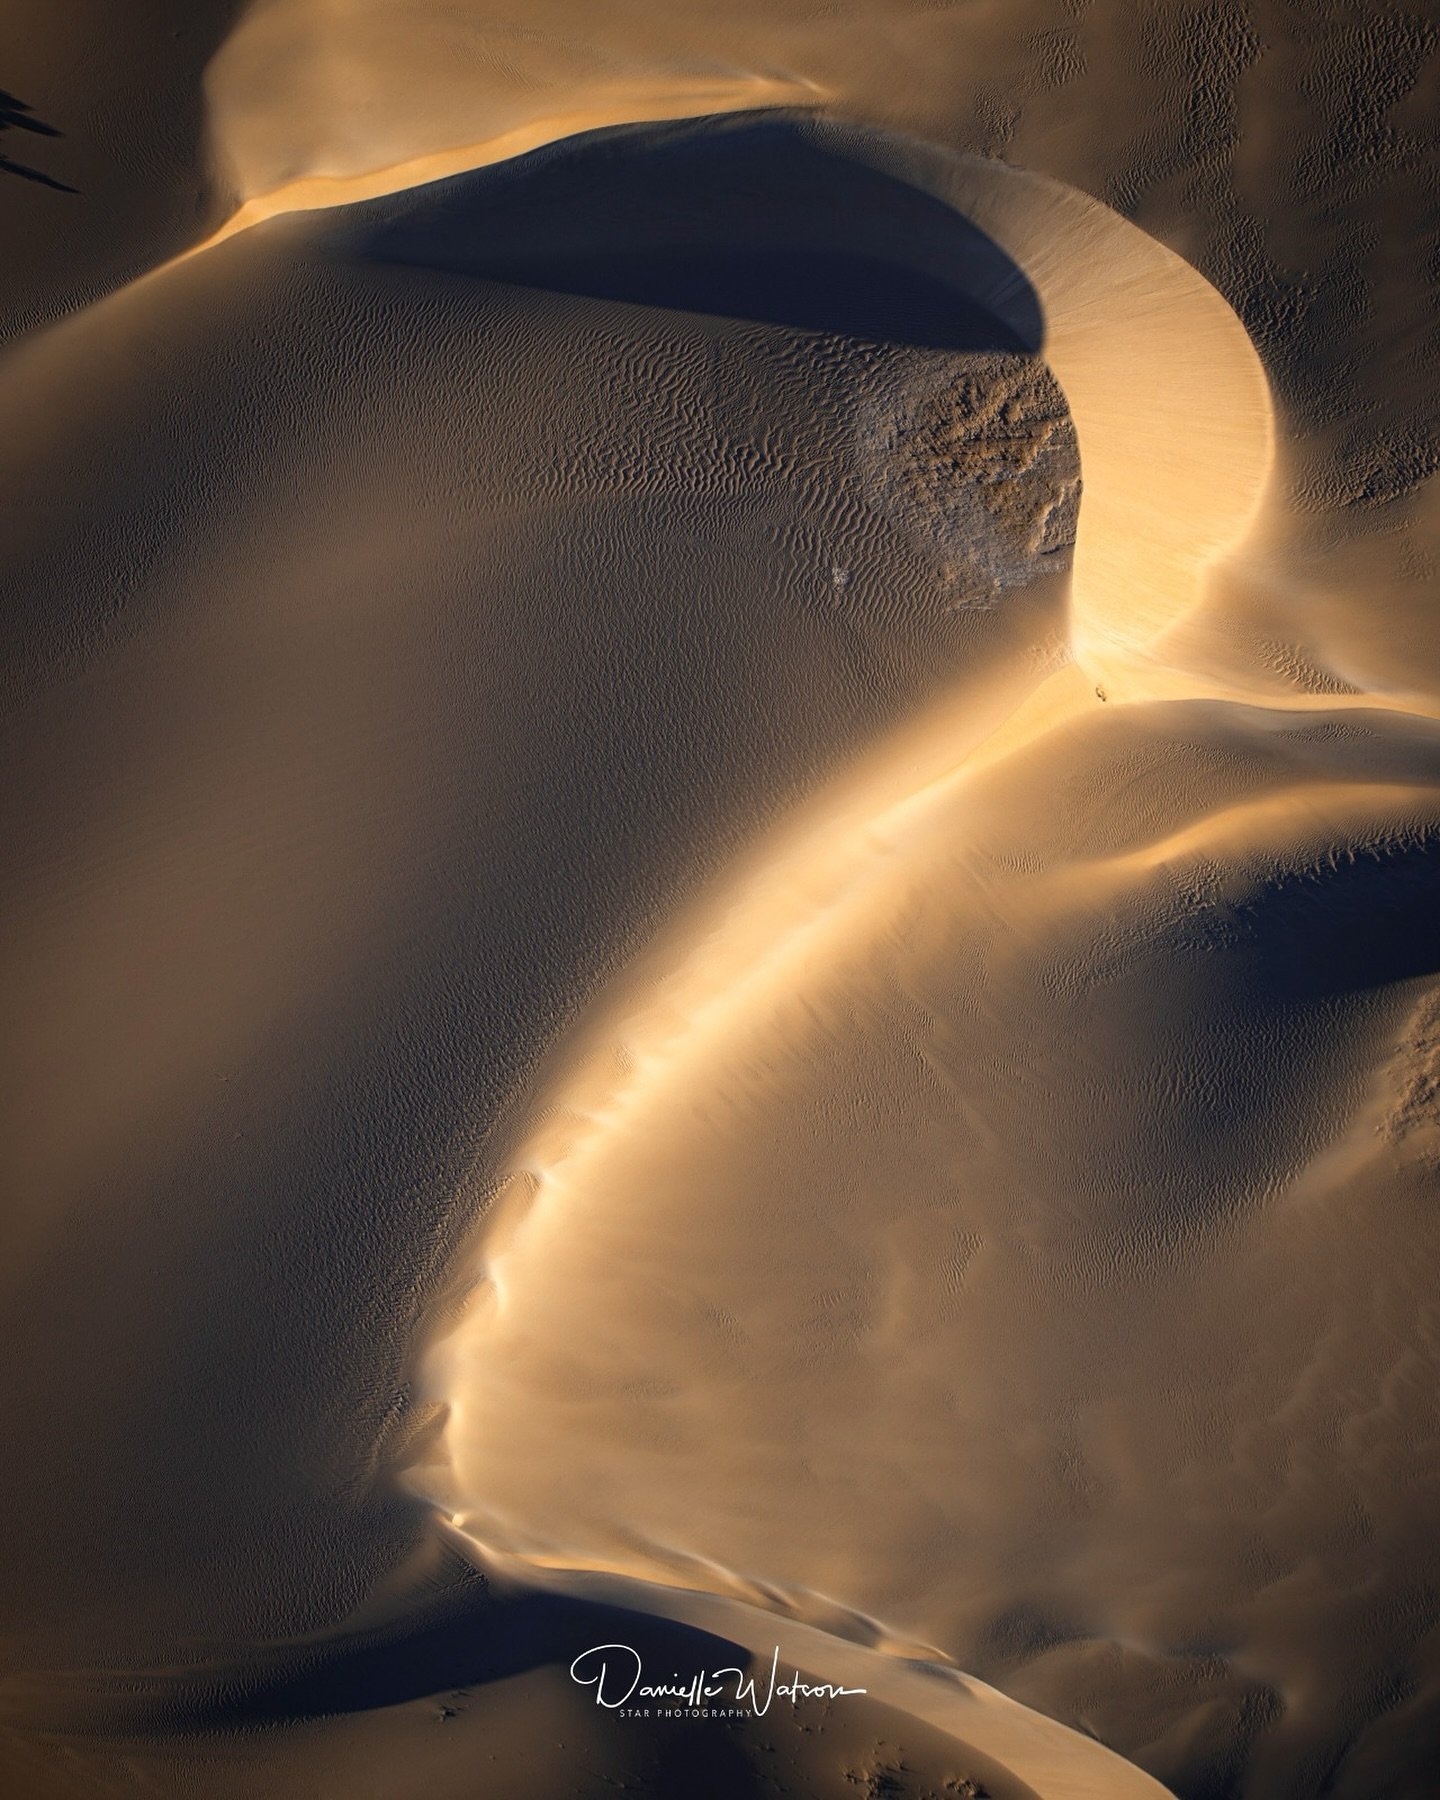 Just had an unforgettable adventure exploring the vast sand dunes, and it reminded me of something crucial &ndash; being in the right place at the right time truly makes all the difference, especially when it comes to photography. The way the lightin